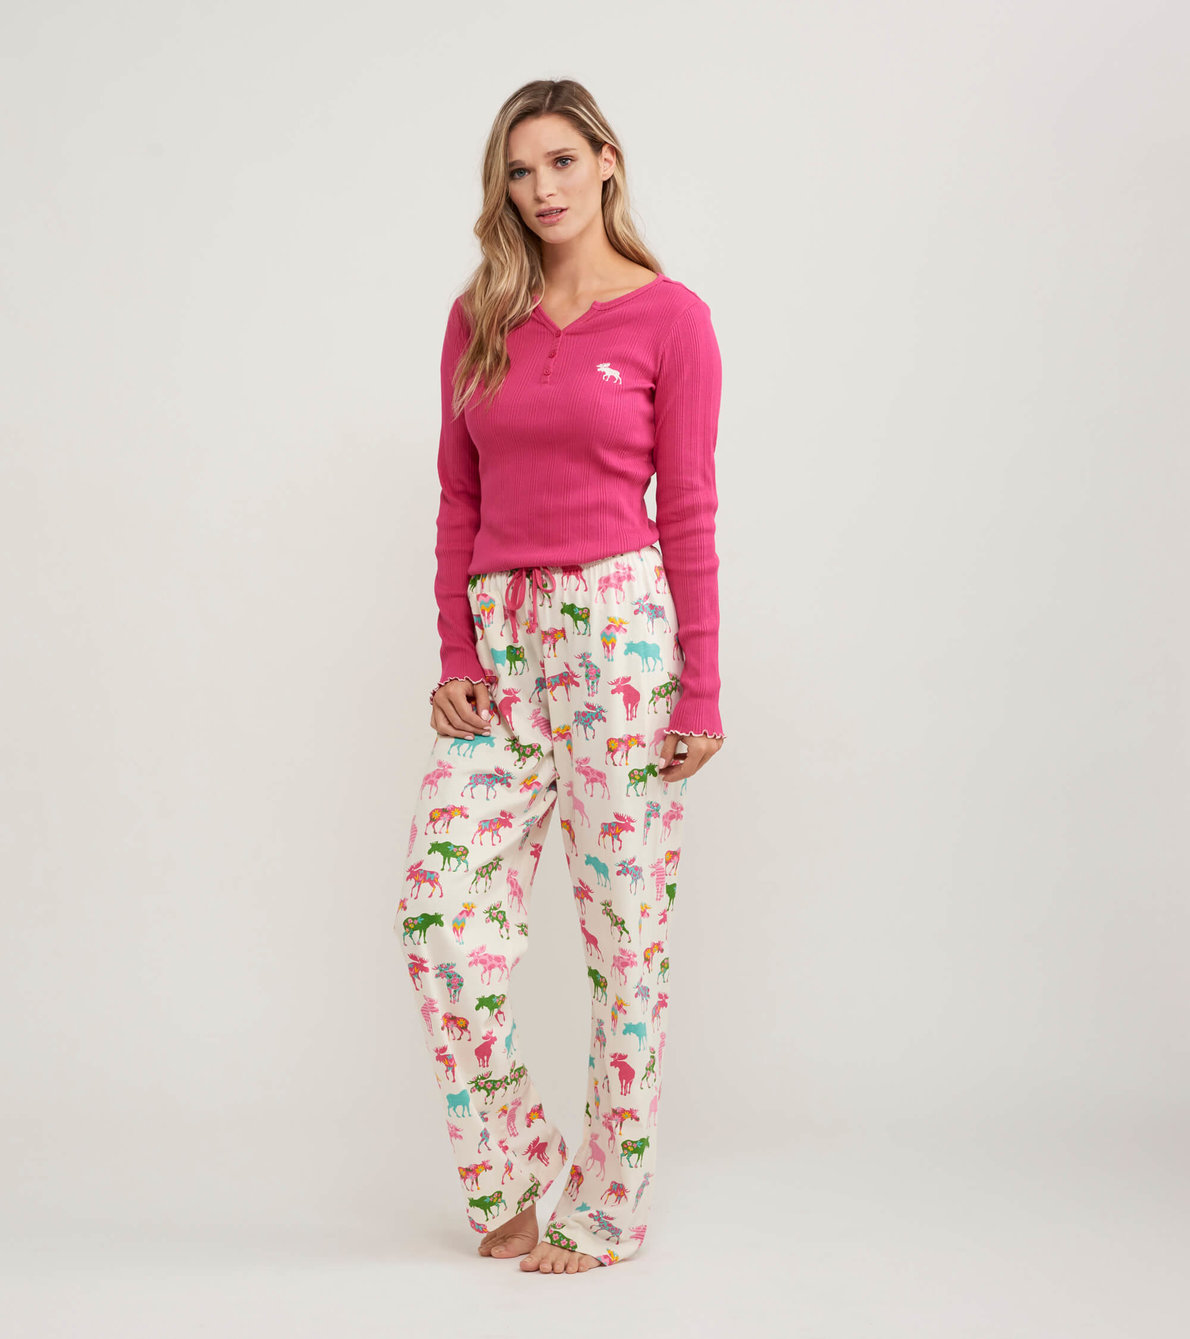 View larger image of Patterned Moose Women's Tee and Pants Pajama Separates